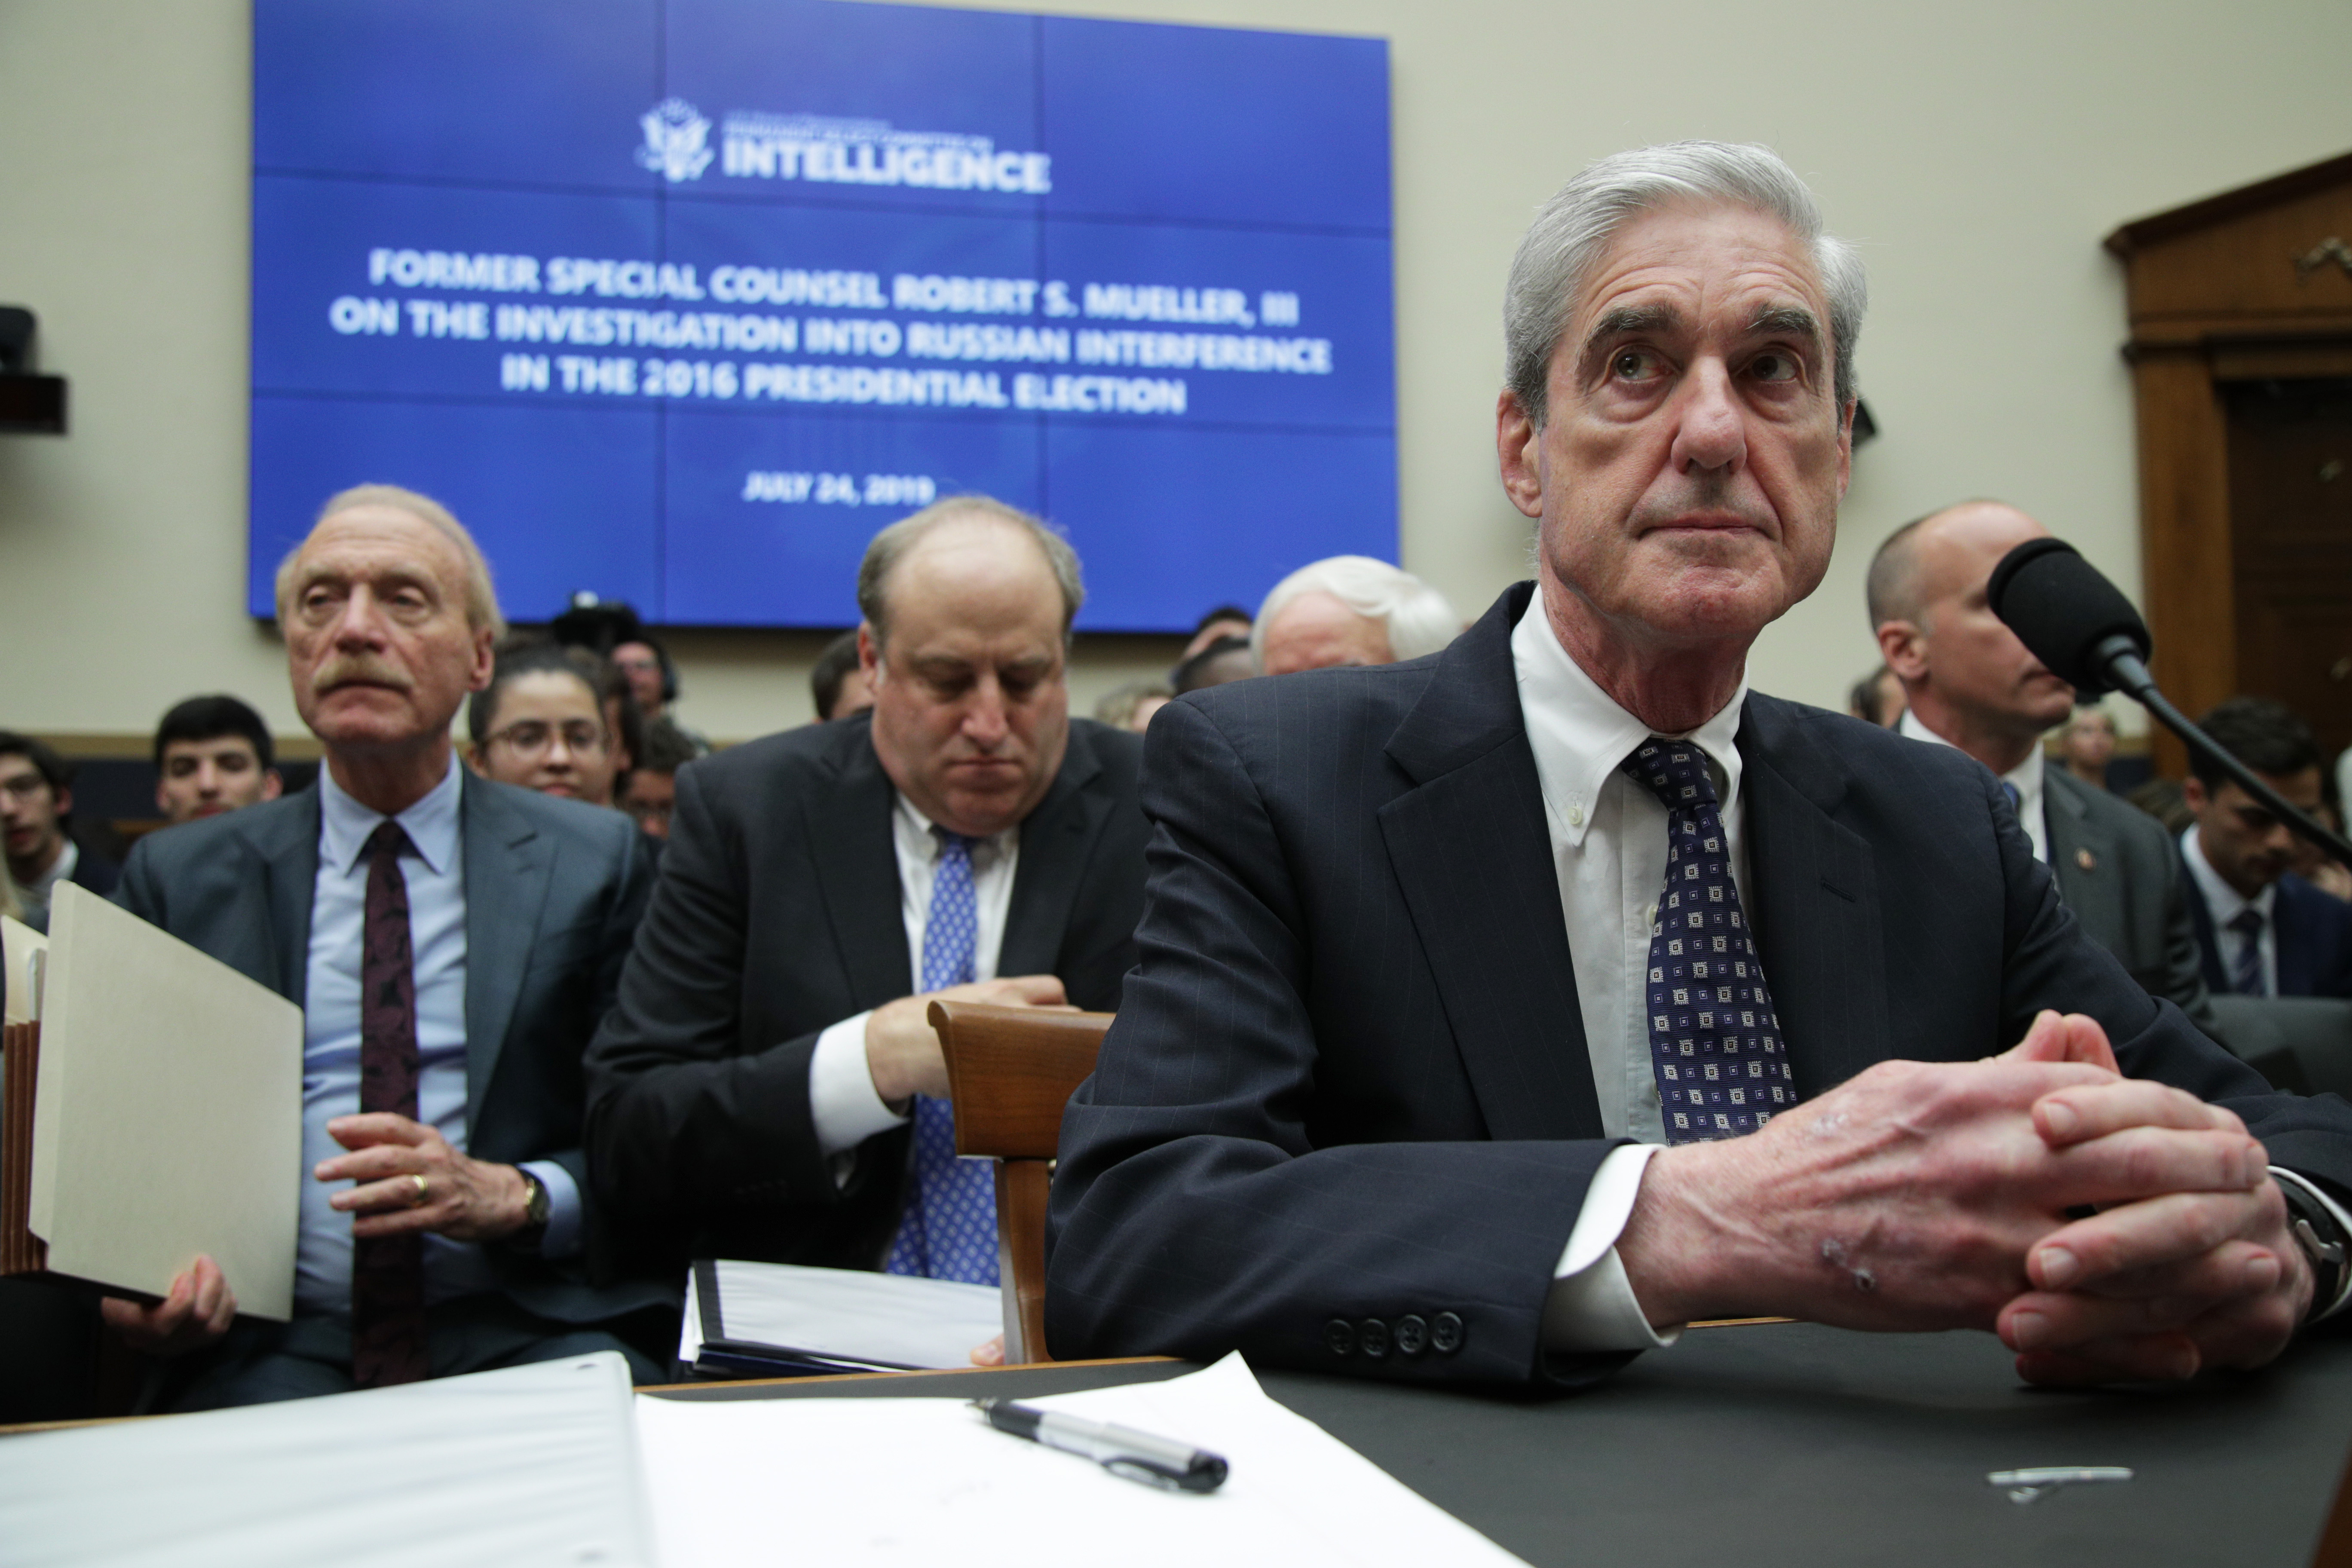 WASHINGTON, DC - JULY 24: Former Special Counsel Robert Mueller testifies before the House Intelligence Committee about his report on Russian interference in the 2016 presidential election in the Rayburn House Office Building July 24, 2019 in Washington, DC. Mueller testified earlier in the day before the House Judiciary Committee in back-to-back hearings on Capitol Hill. (Photo by Alex Wong/Getty Images)